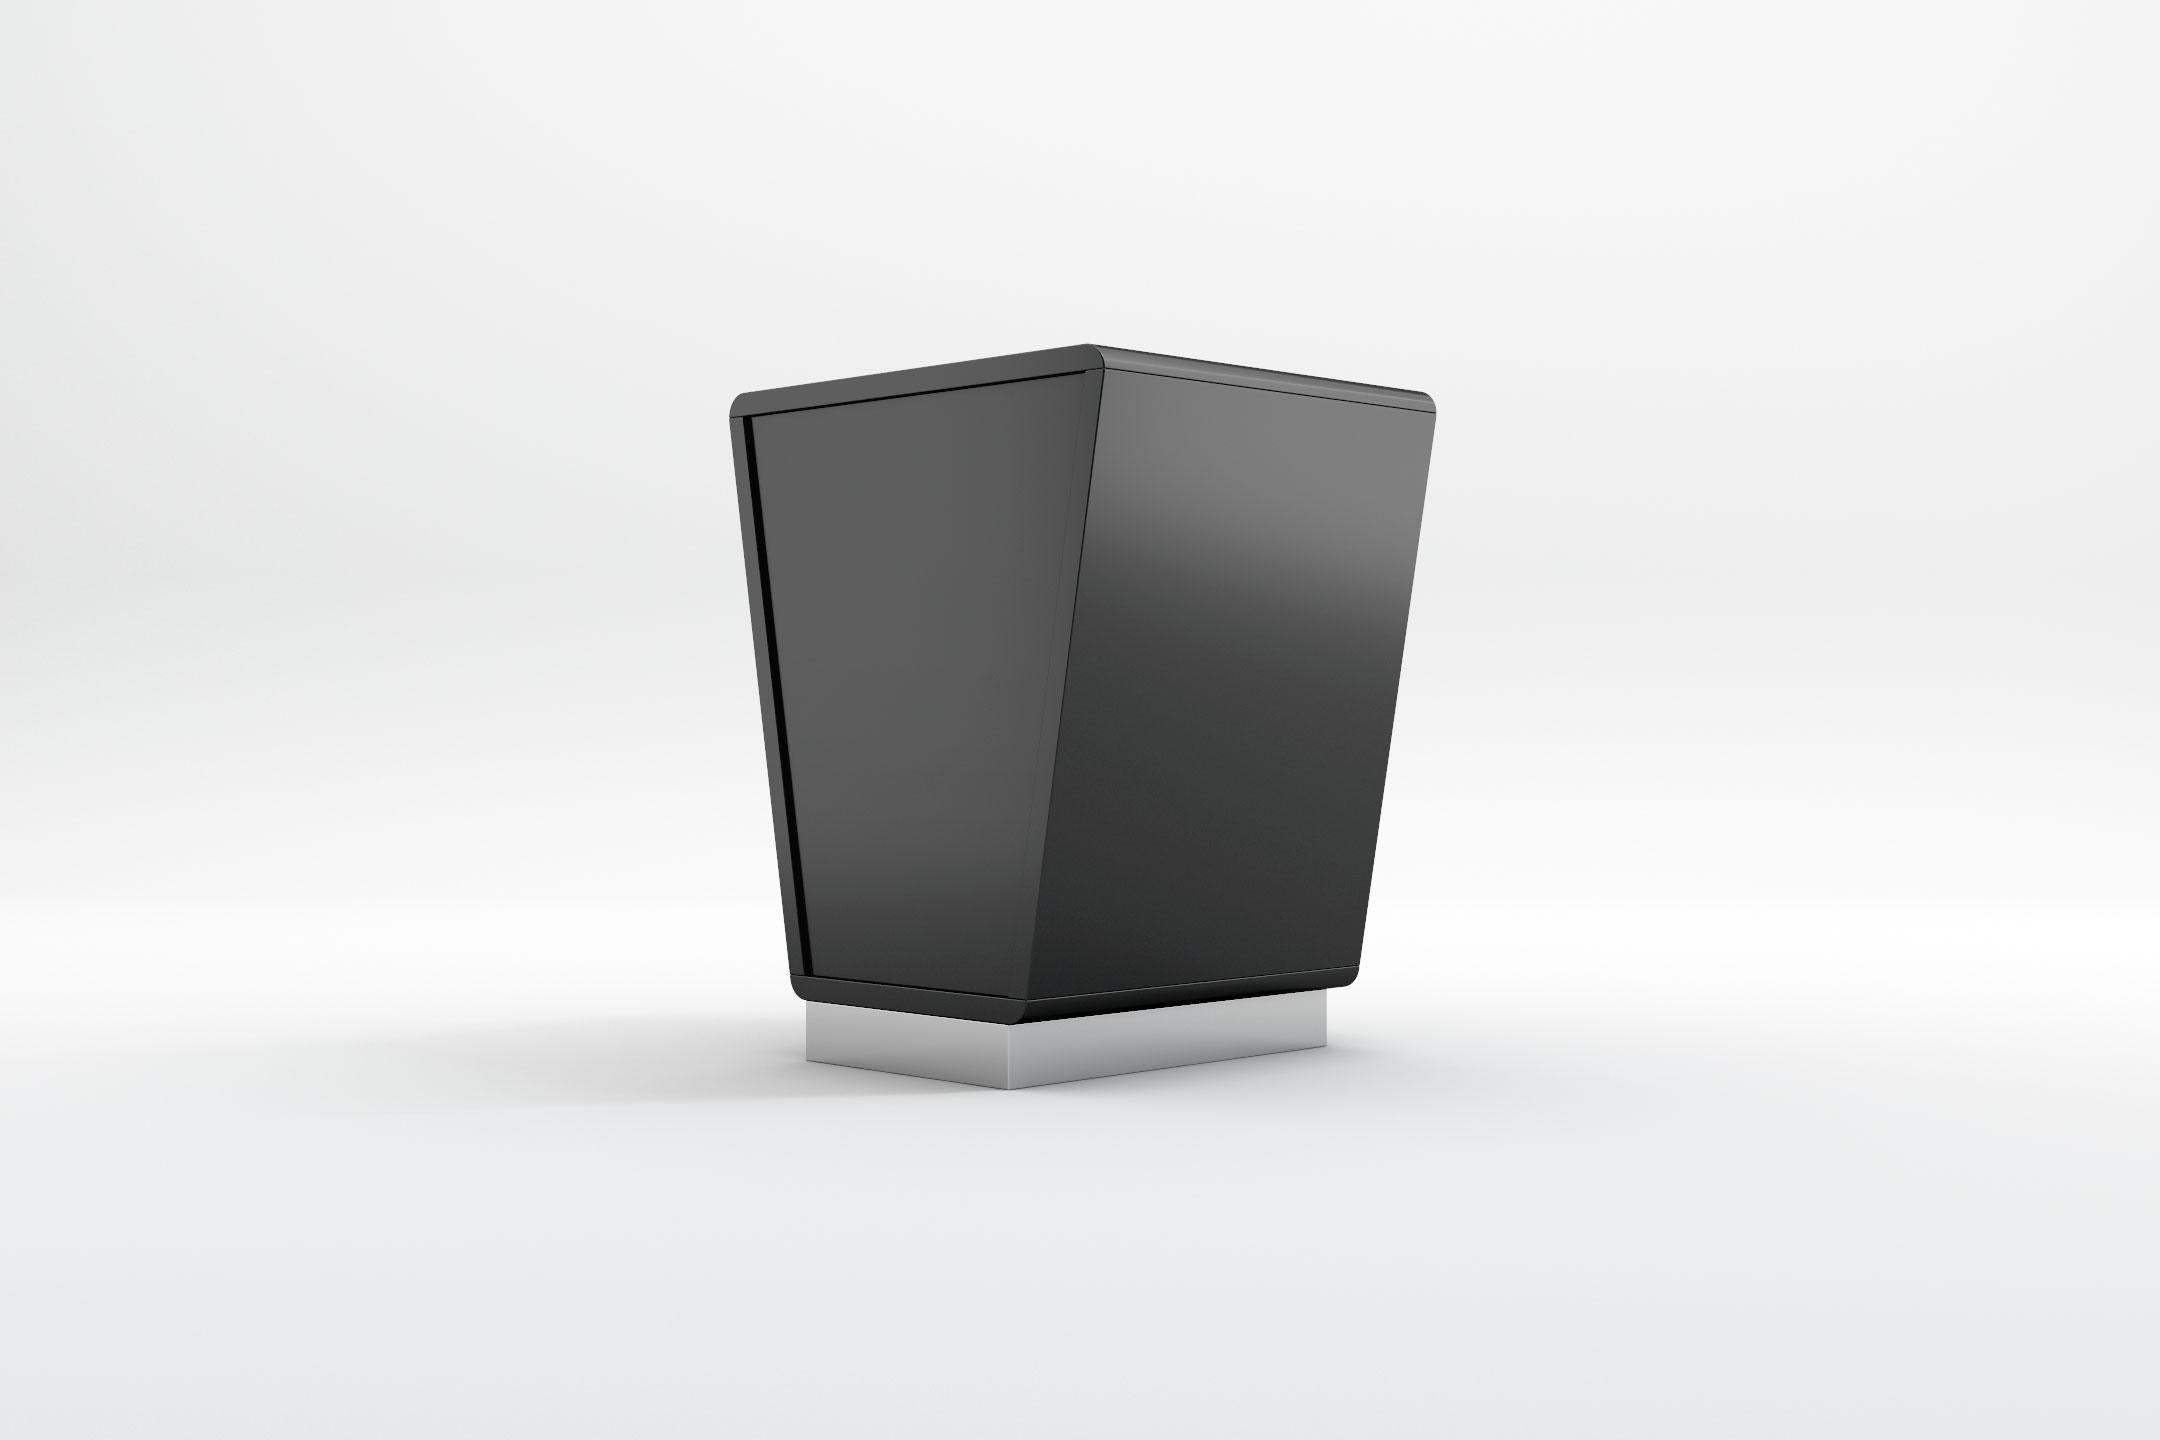 European Obsidian Bedside Table - Modern Black Lacquered Table with Chrome Plinth For Sale